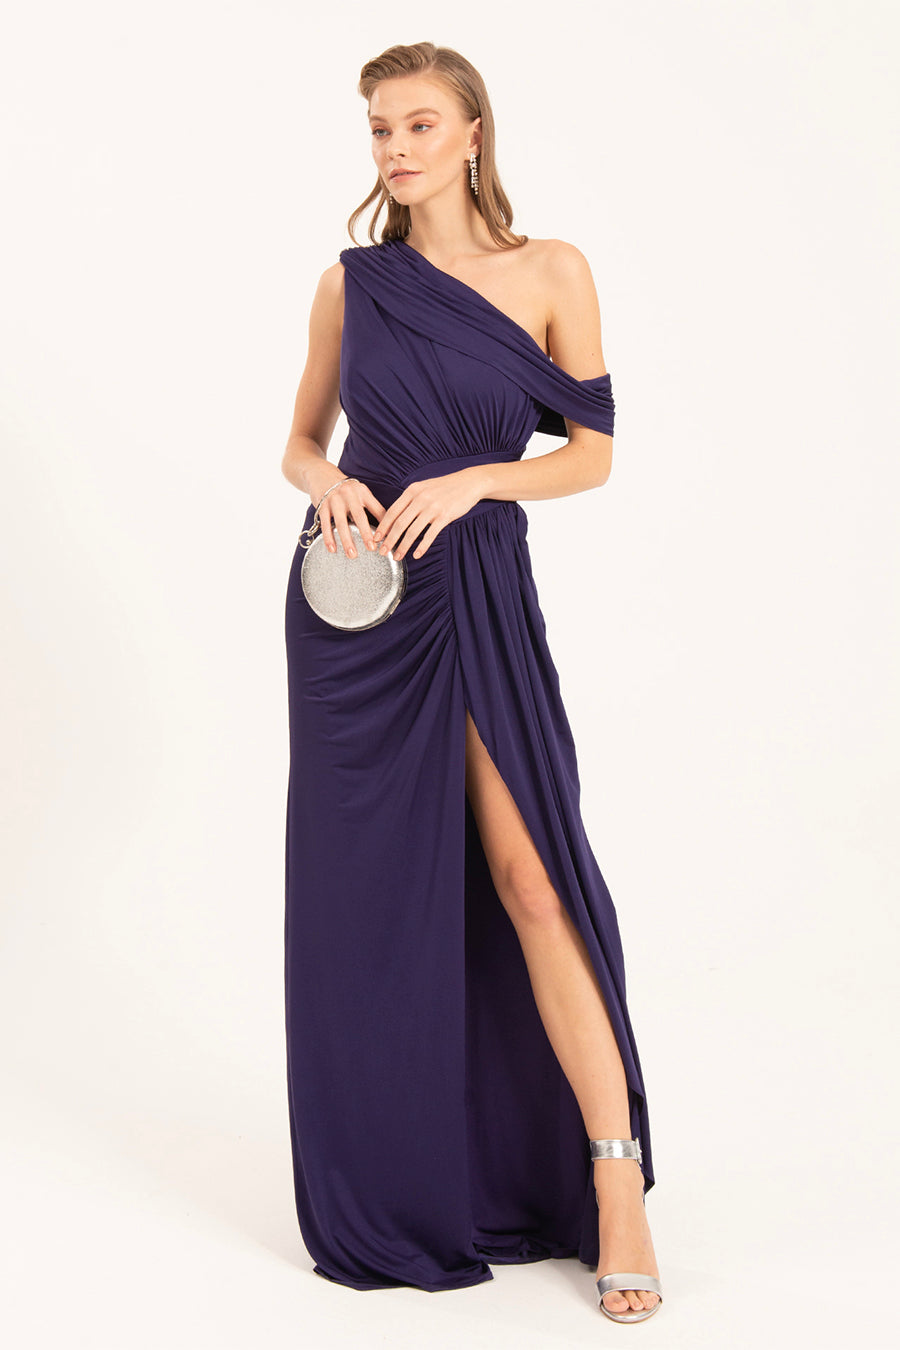 Milana - Mystic Evenings | Evening and Prom Dresses